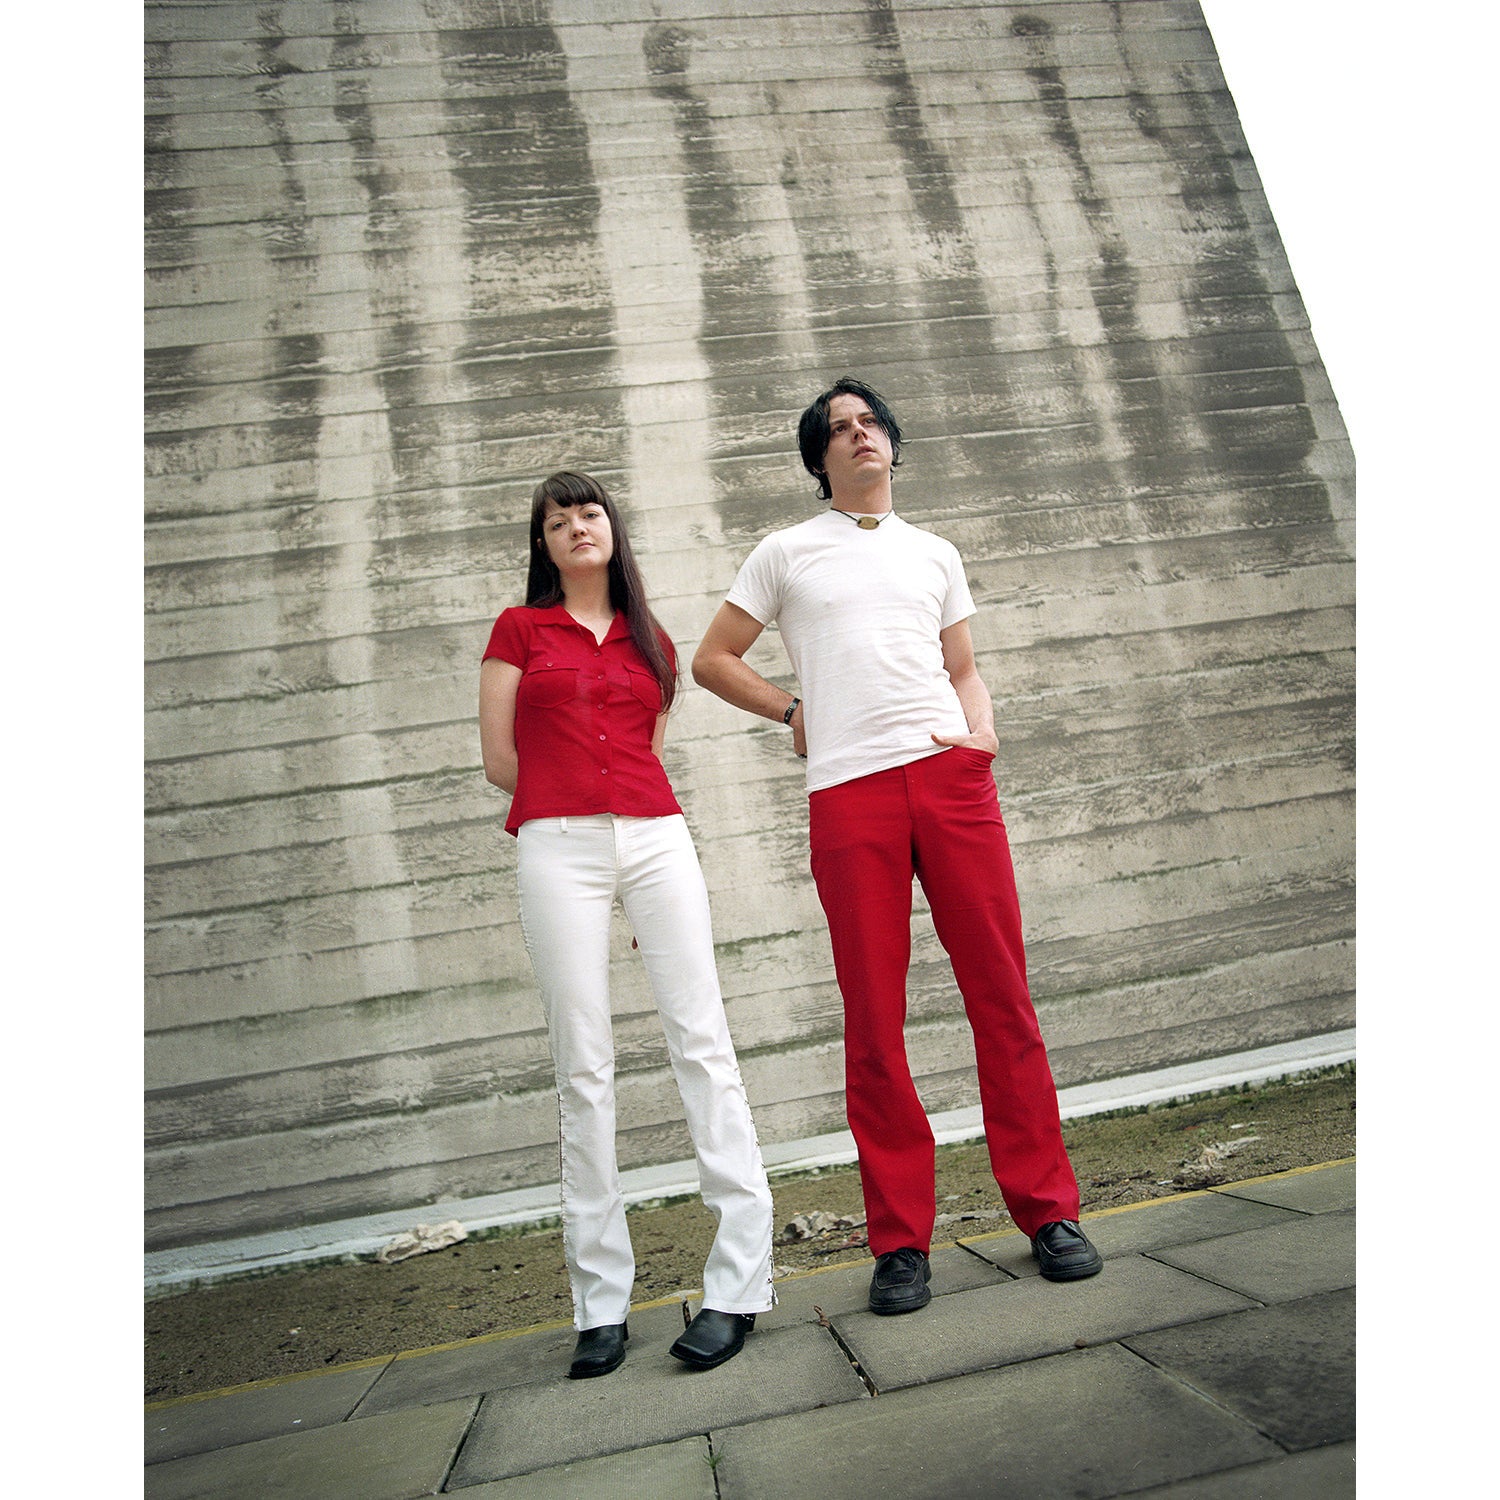 White Stripes 2001 - colour - Scarlet Page - Limited Edition Prints